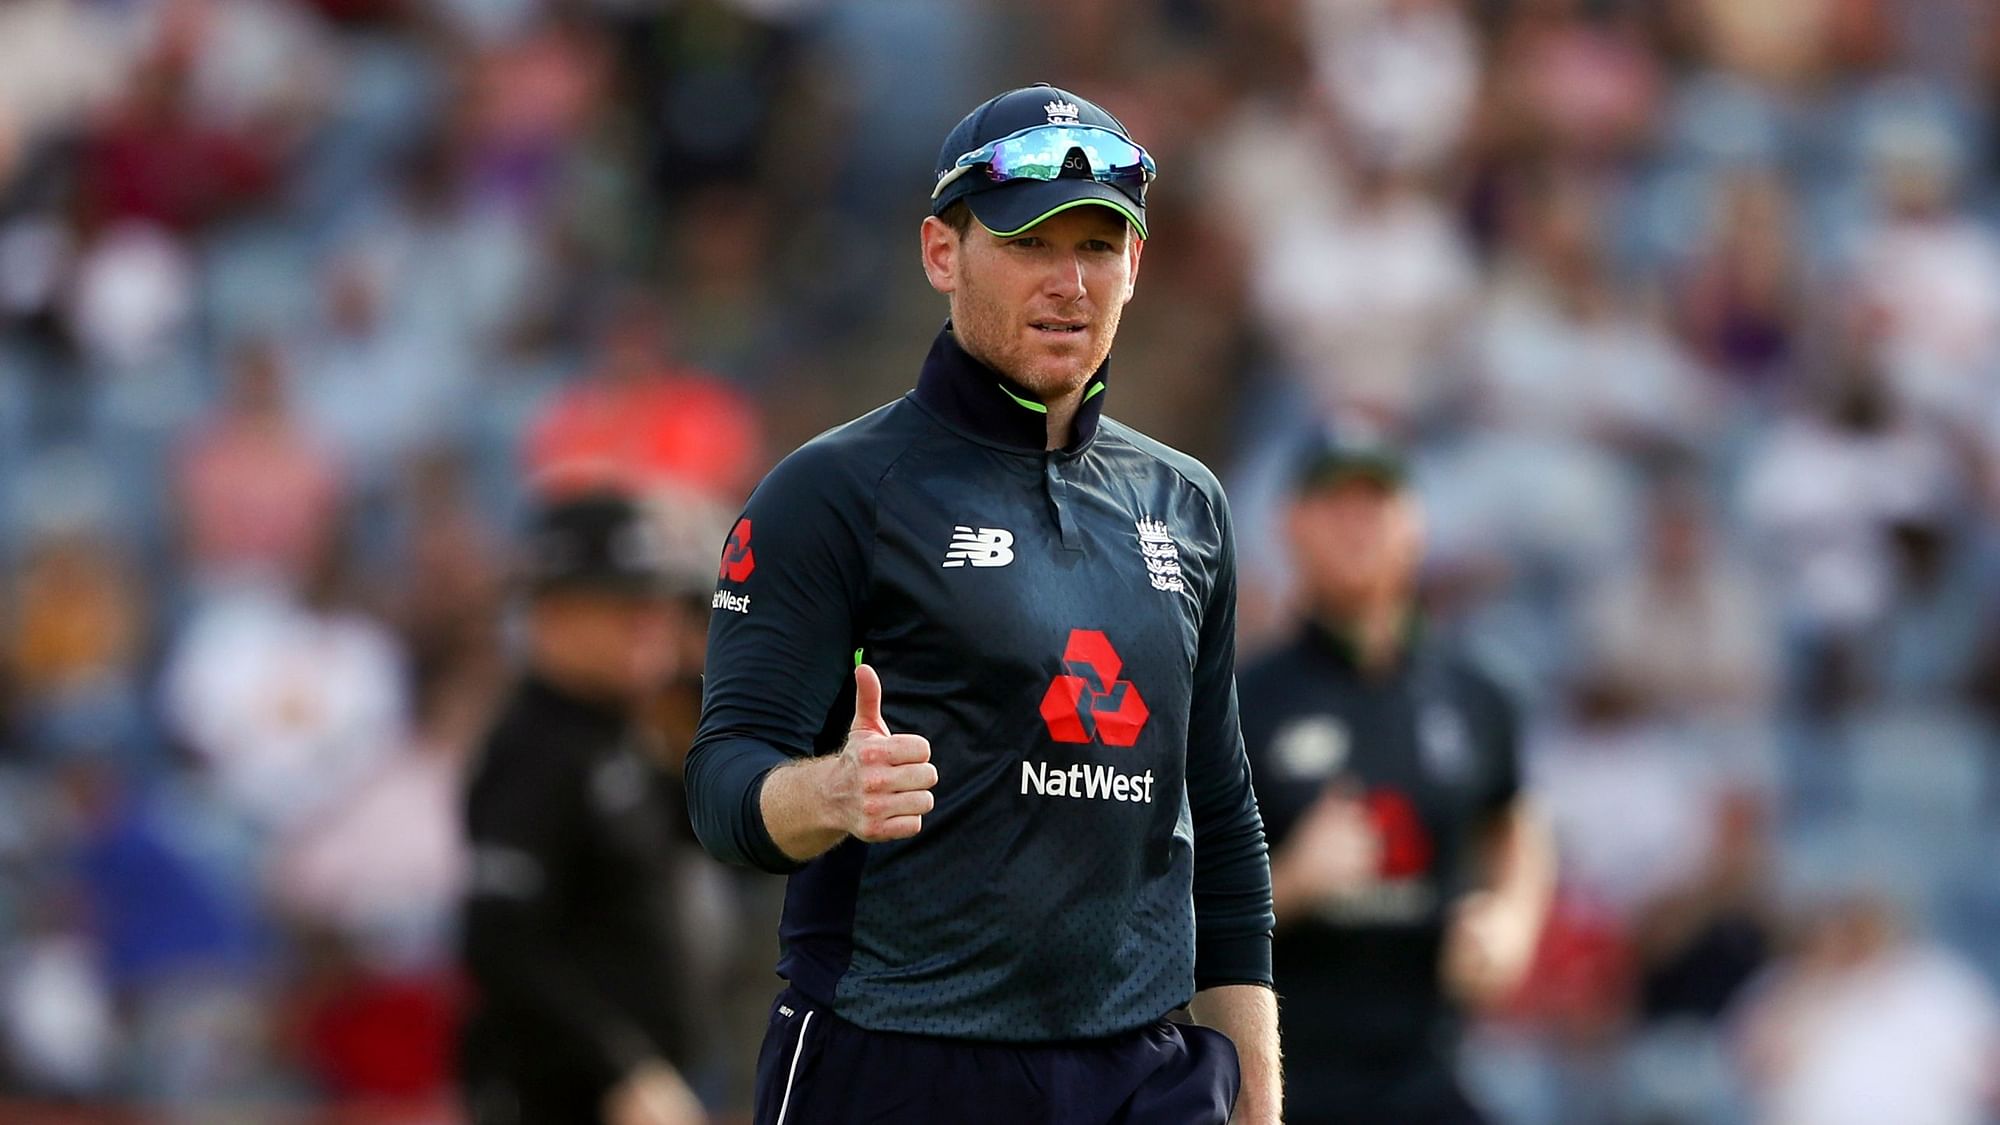 England captain Eoin Morgan has been suspended for one ODI and fined 40 per cent of his match fee.